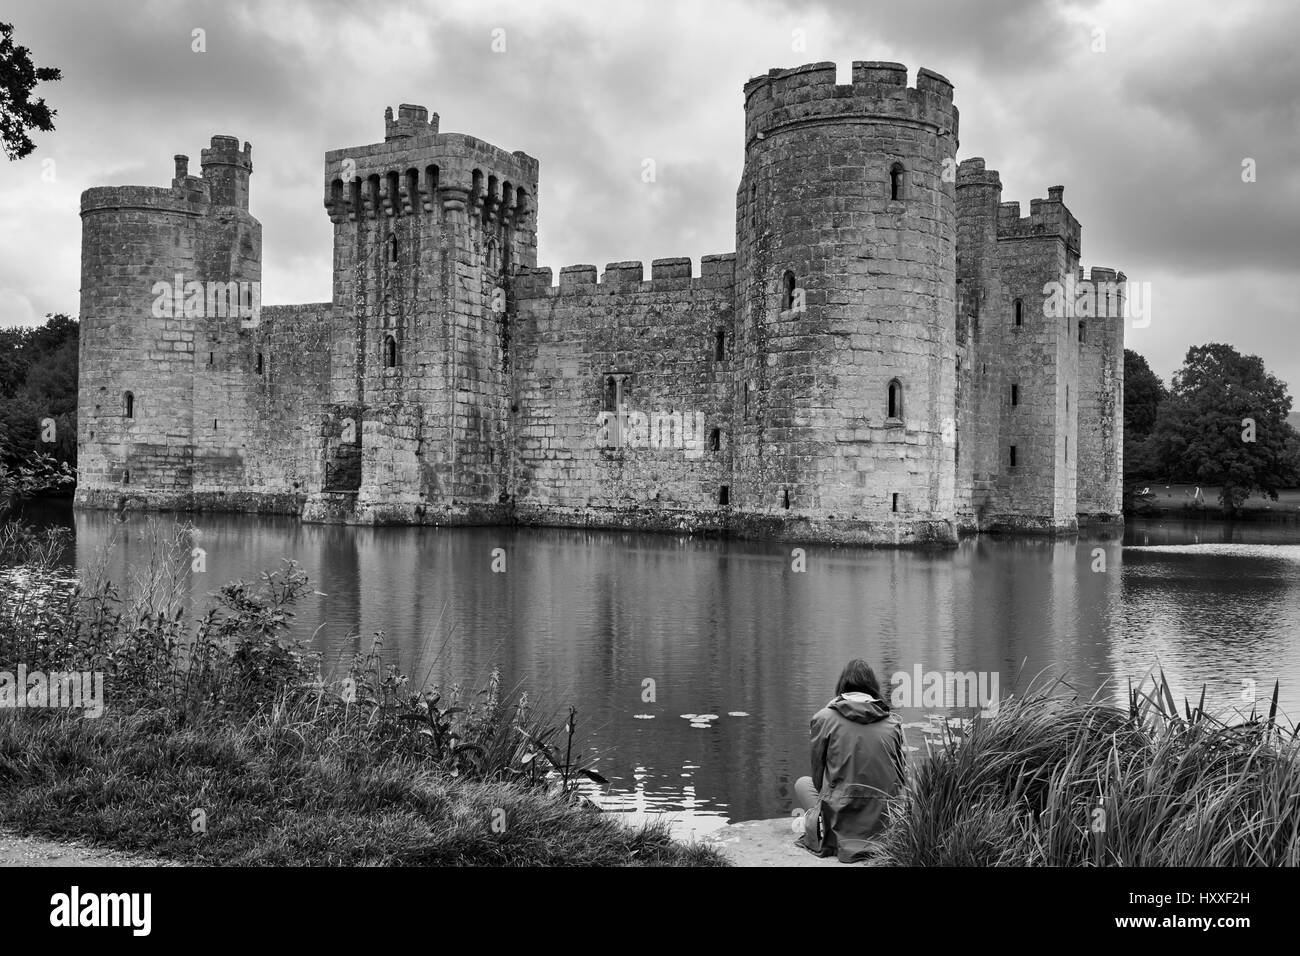 Bodiam Castle, East Sussex, England, UK: 14th century moated castle ruins.  Black and white version.  MODEL RELEASED Stock Photo